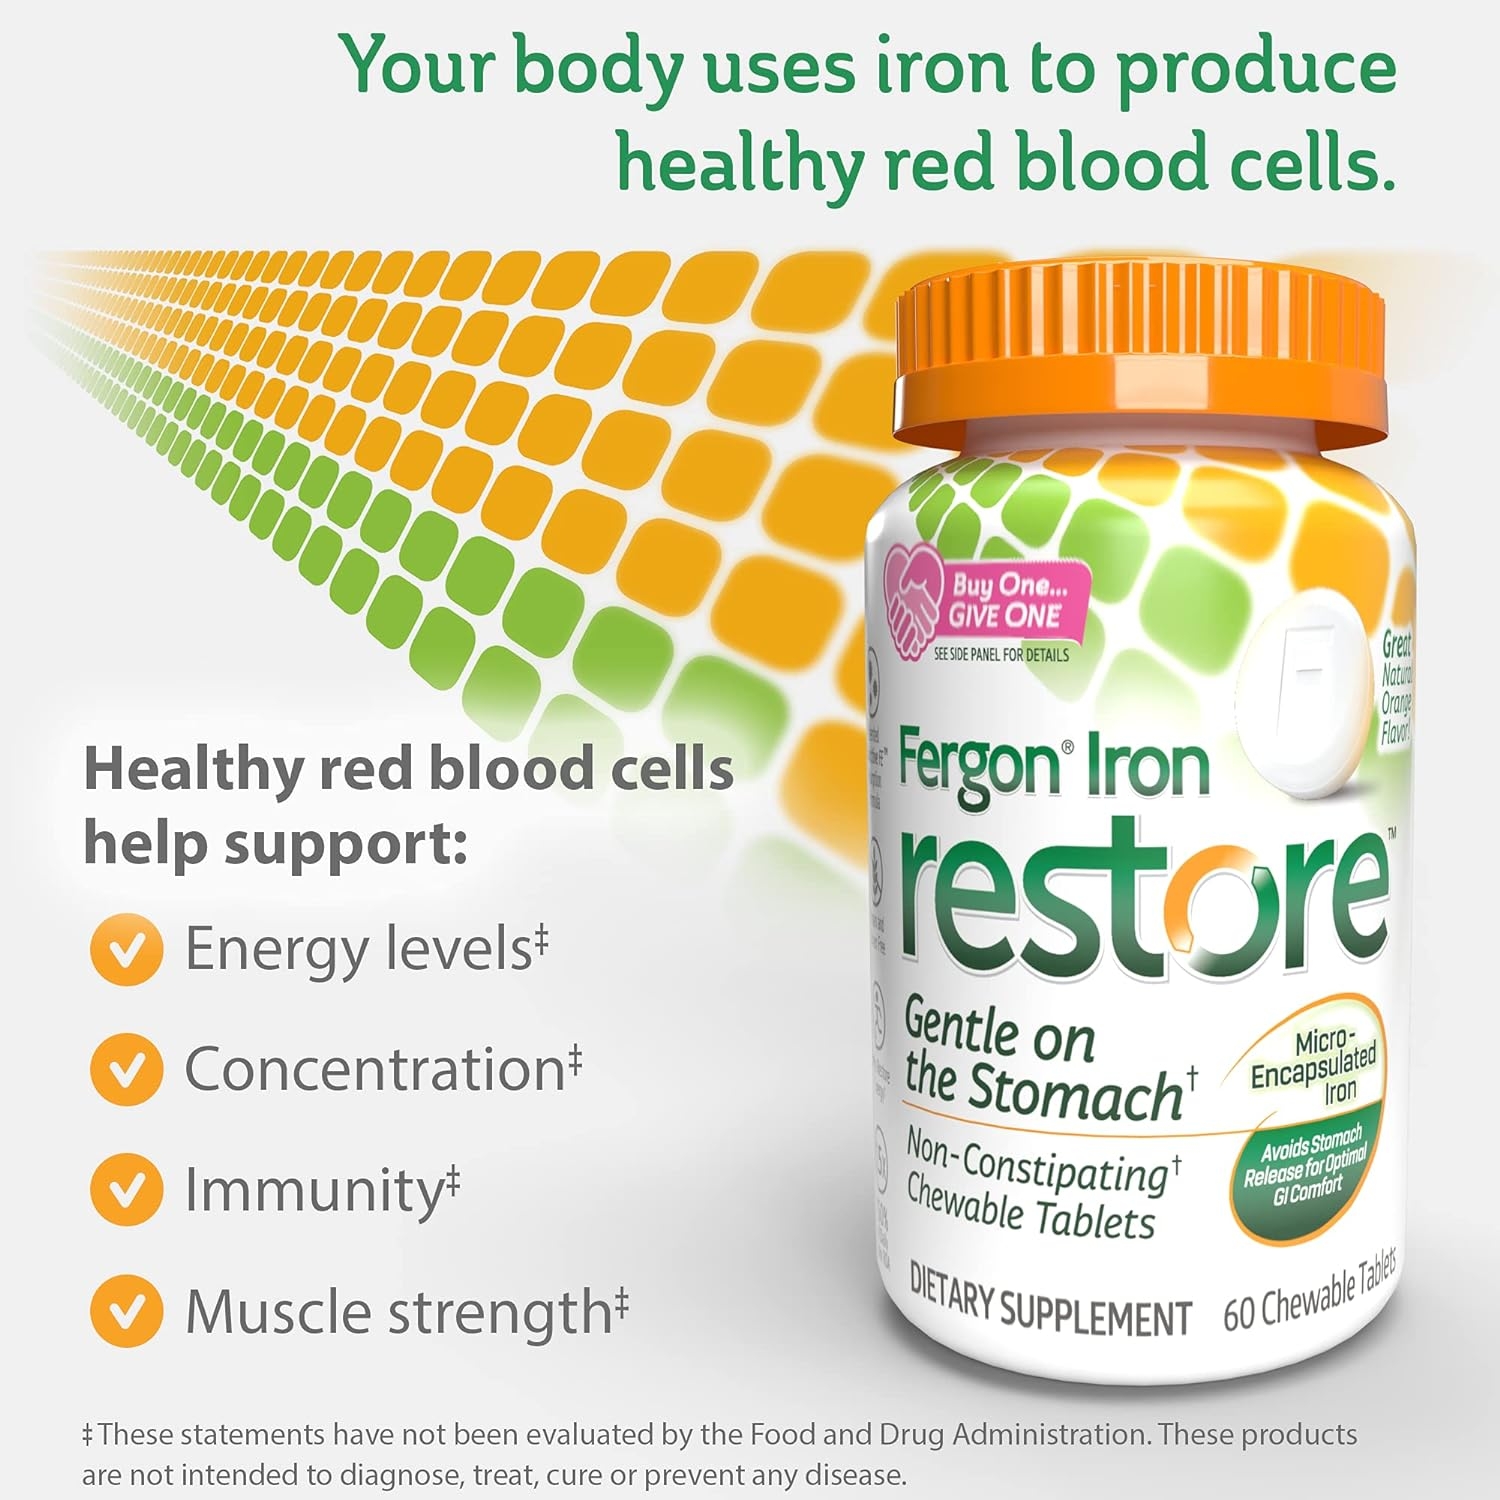 Fergon Iron Restore Chewable Tablets | 27mg of Iron, 150% RDV | Gentle Iron Supplement | Vegan | No Metallic Aftertaste | Replenish Iron Levels to Help Fight Fatigue and Boost Energy | 60 Tablets